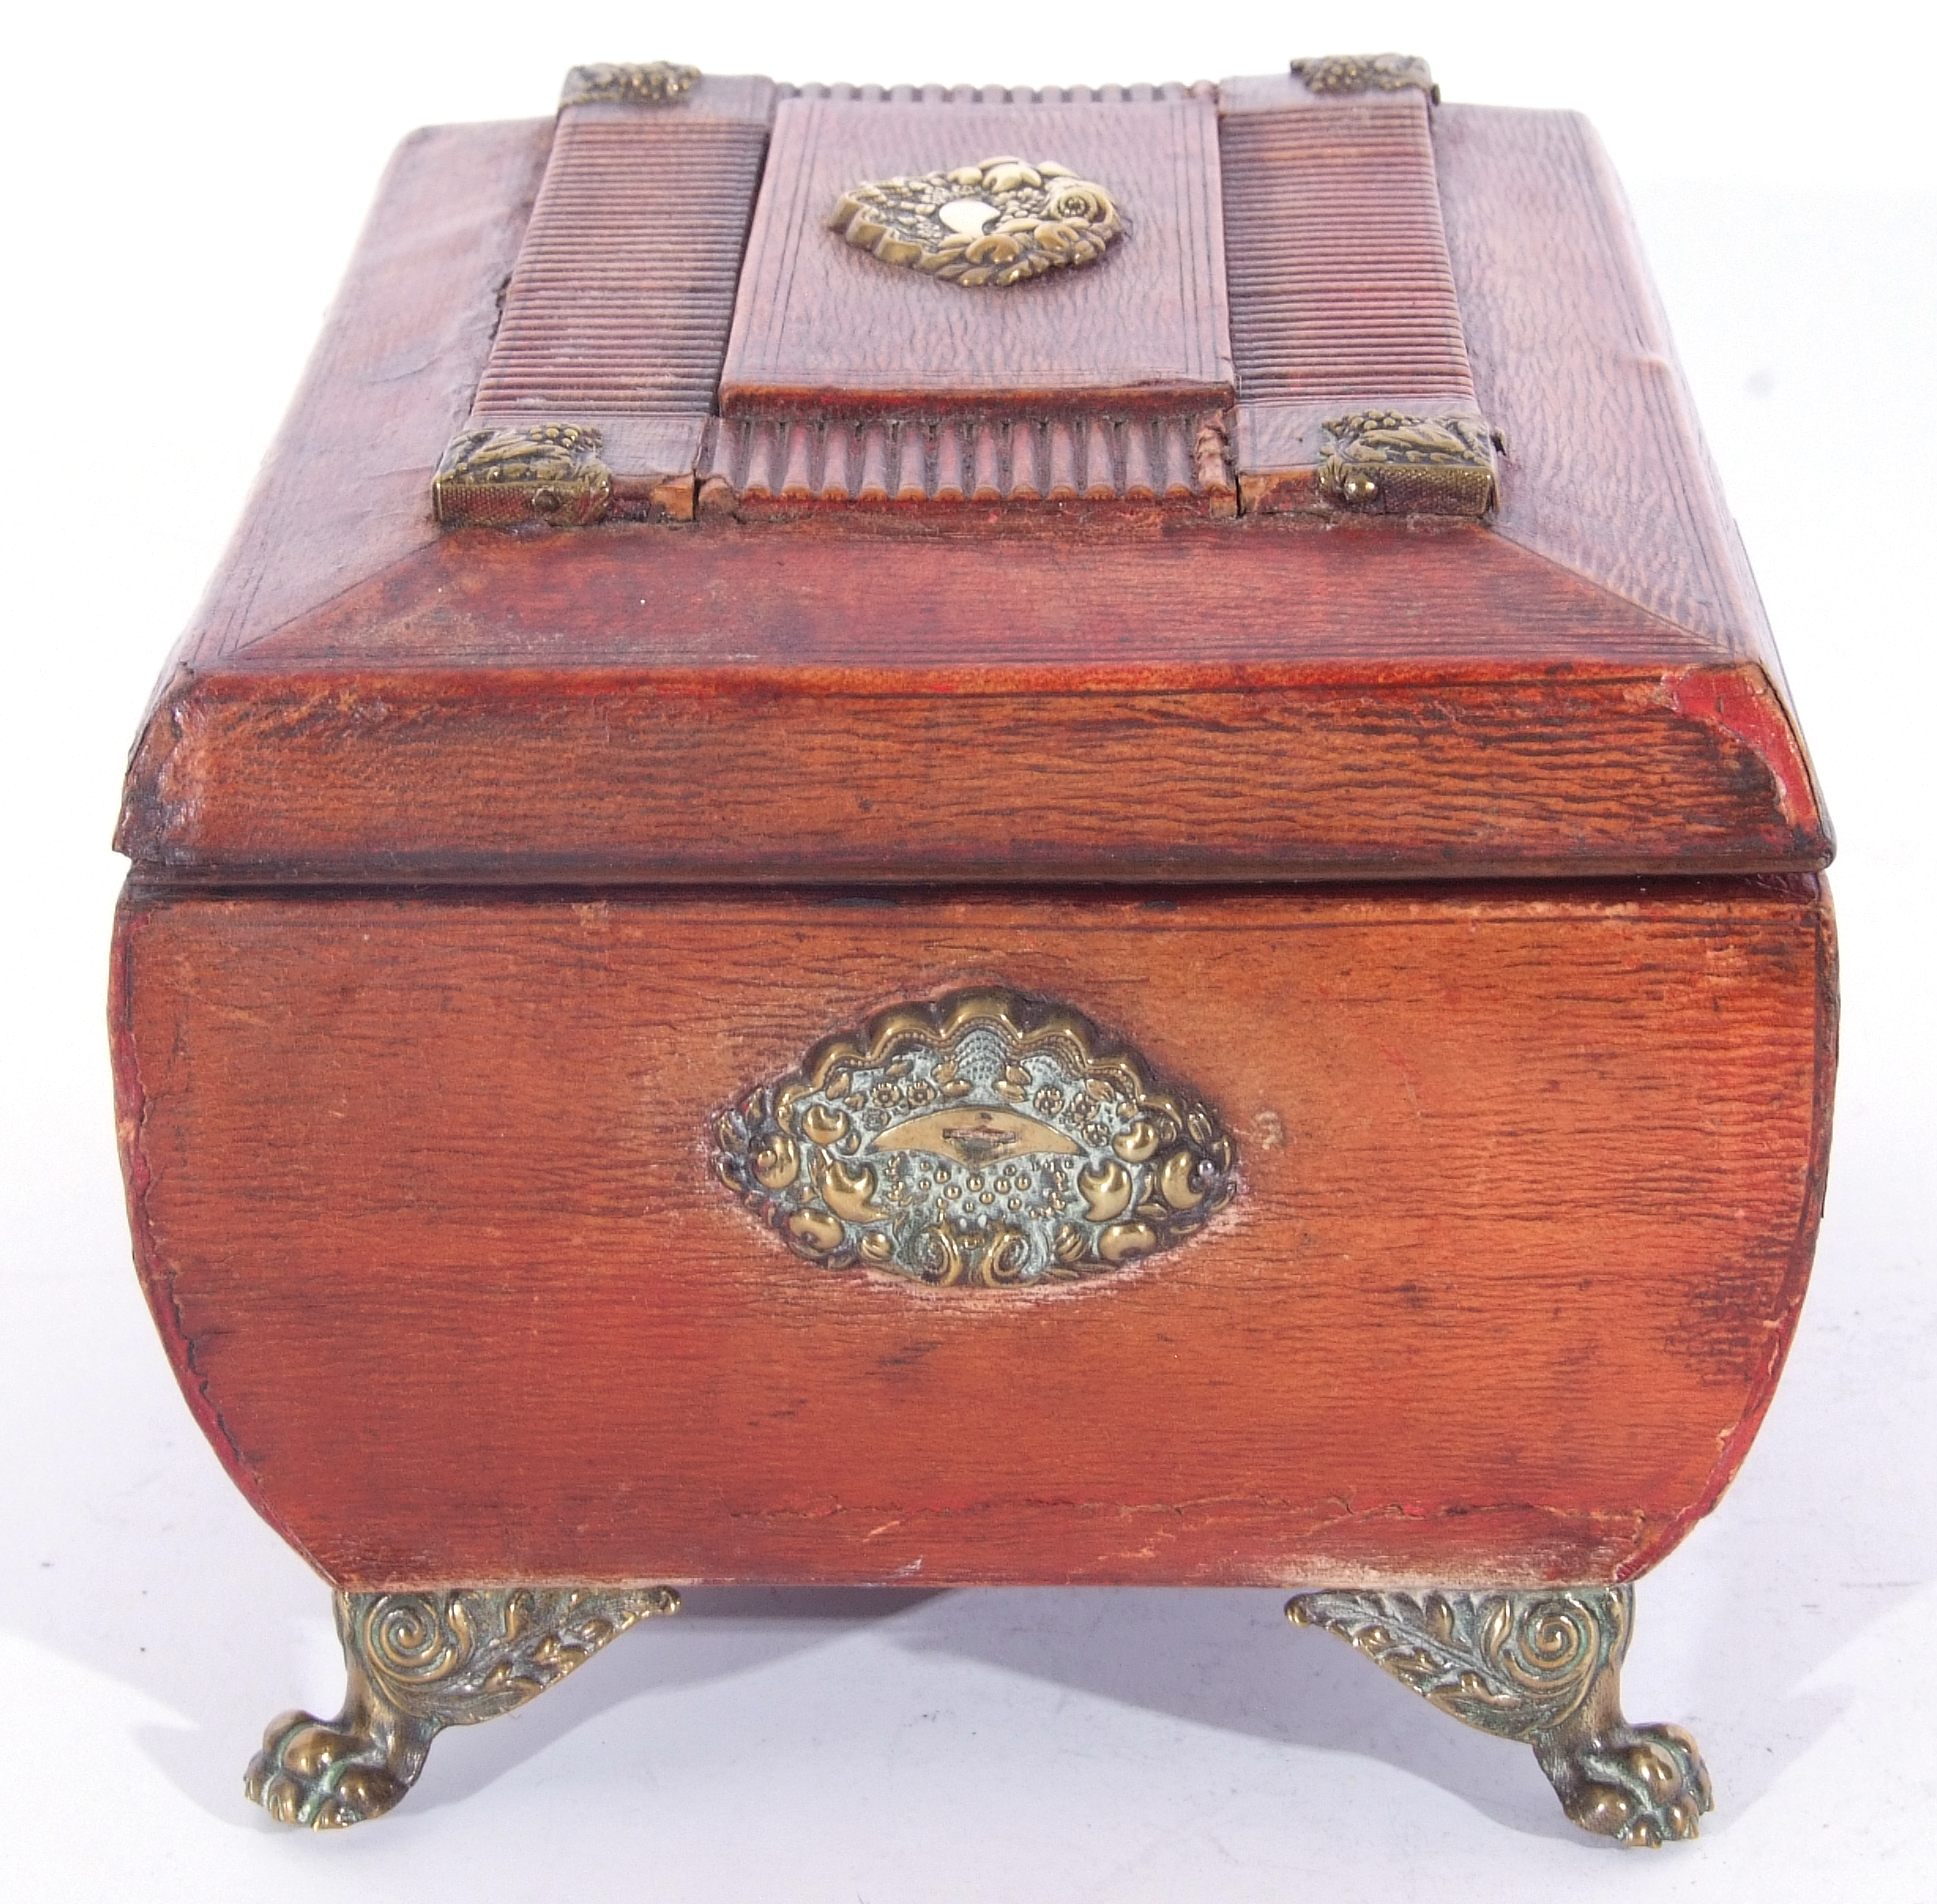 Regency red leather and brass embossed jewel box, hinged lid with silk lined interior, single drawer - Image 9 of 11